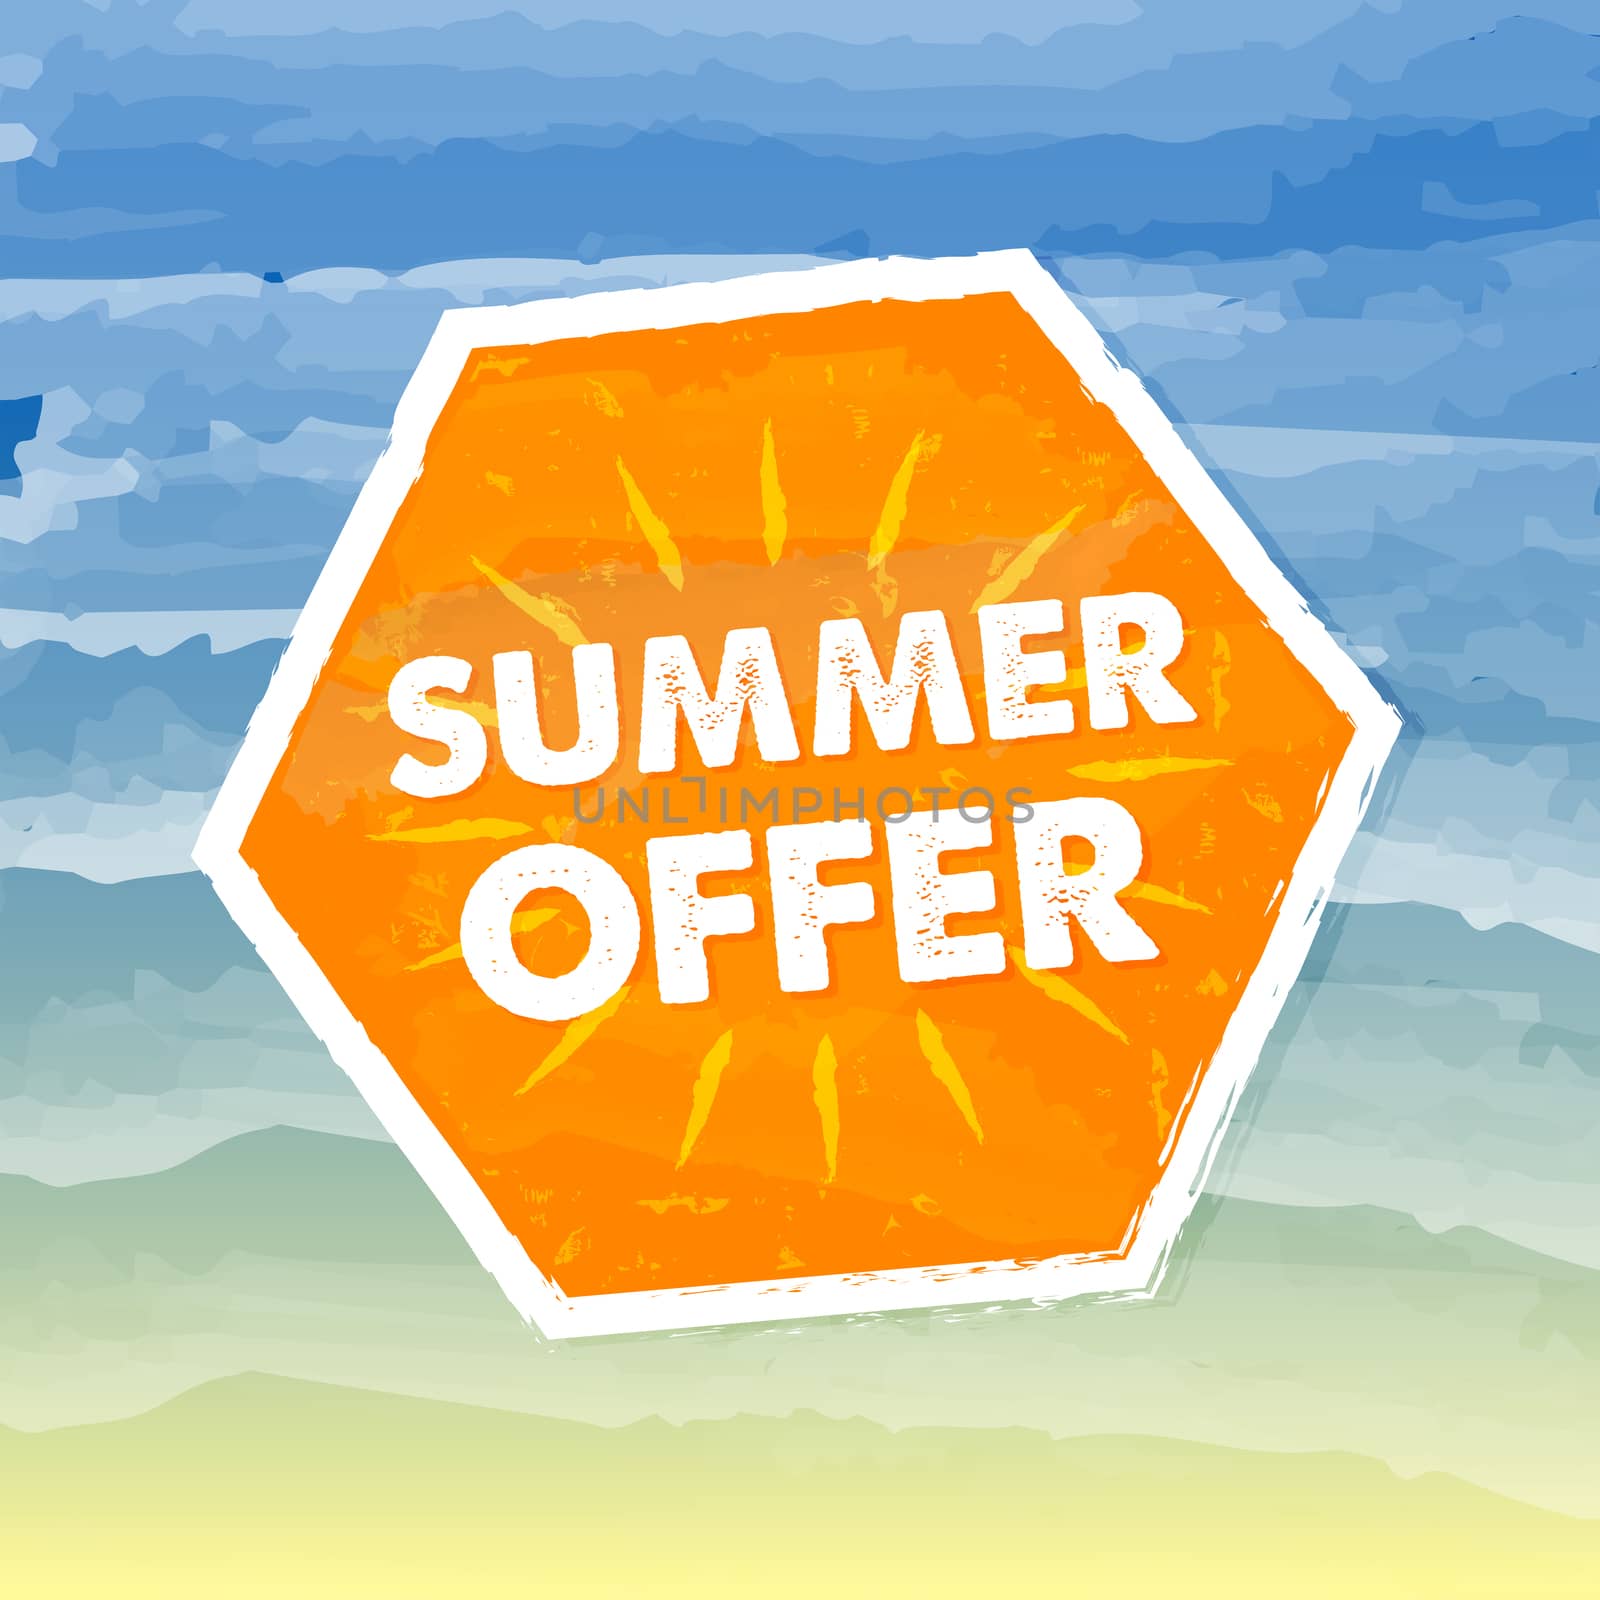 summer offer in orange label over sea background by marinini